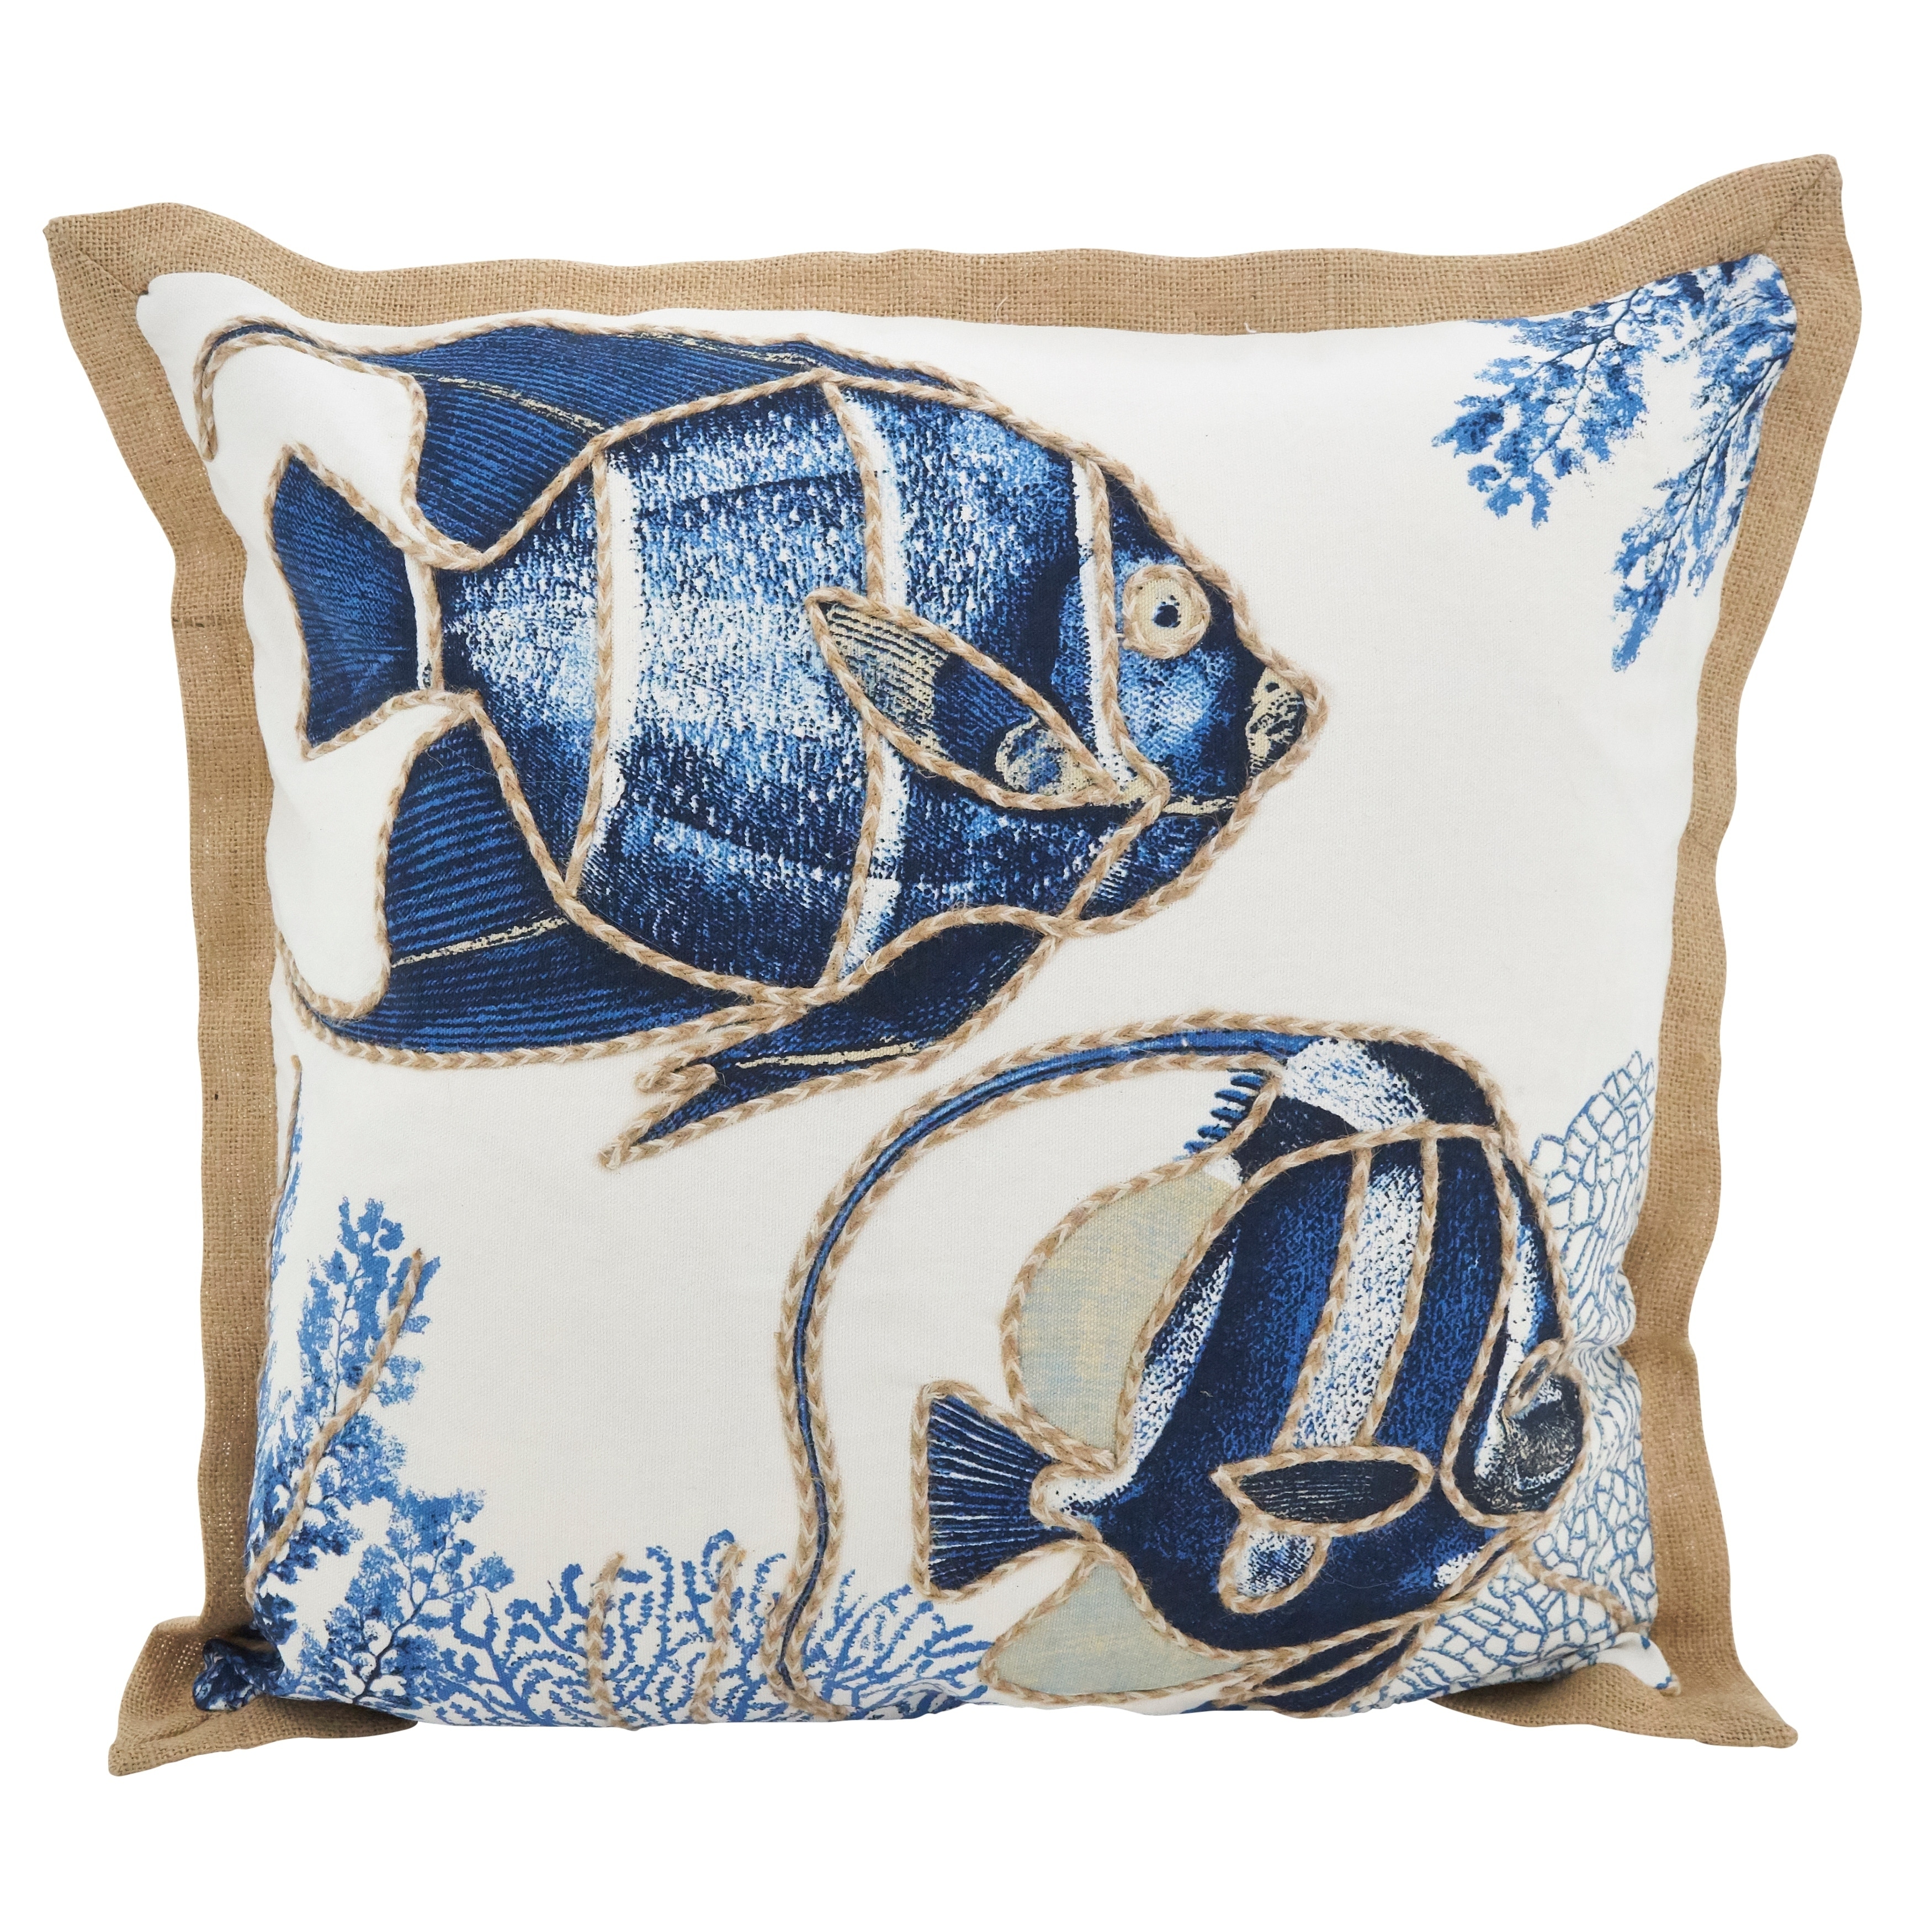 Free Shipping Cotton.Select size Blue  /& White  pillow cover Star Fish Print